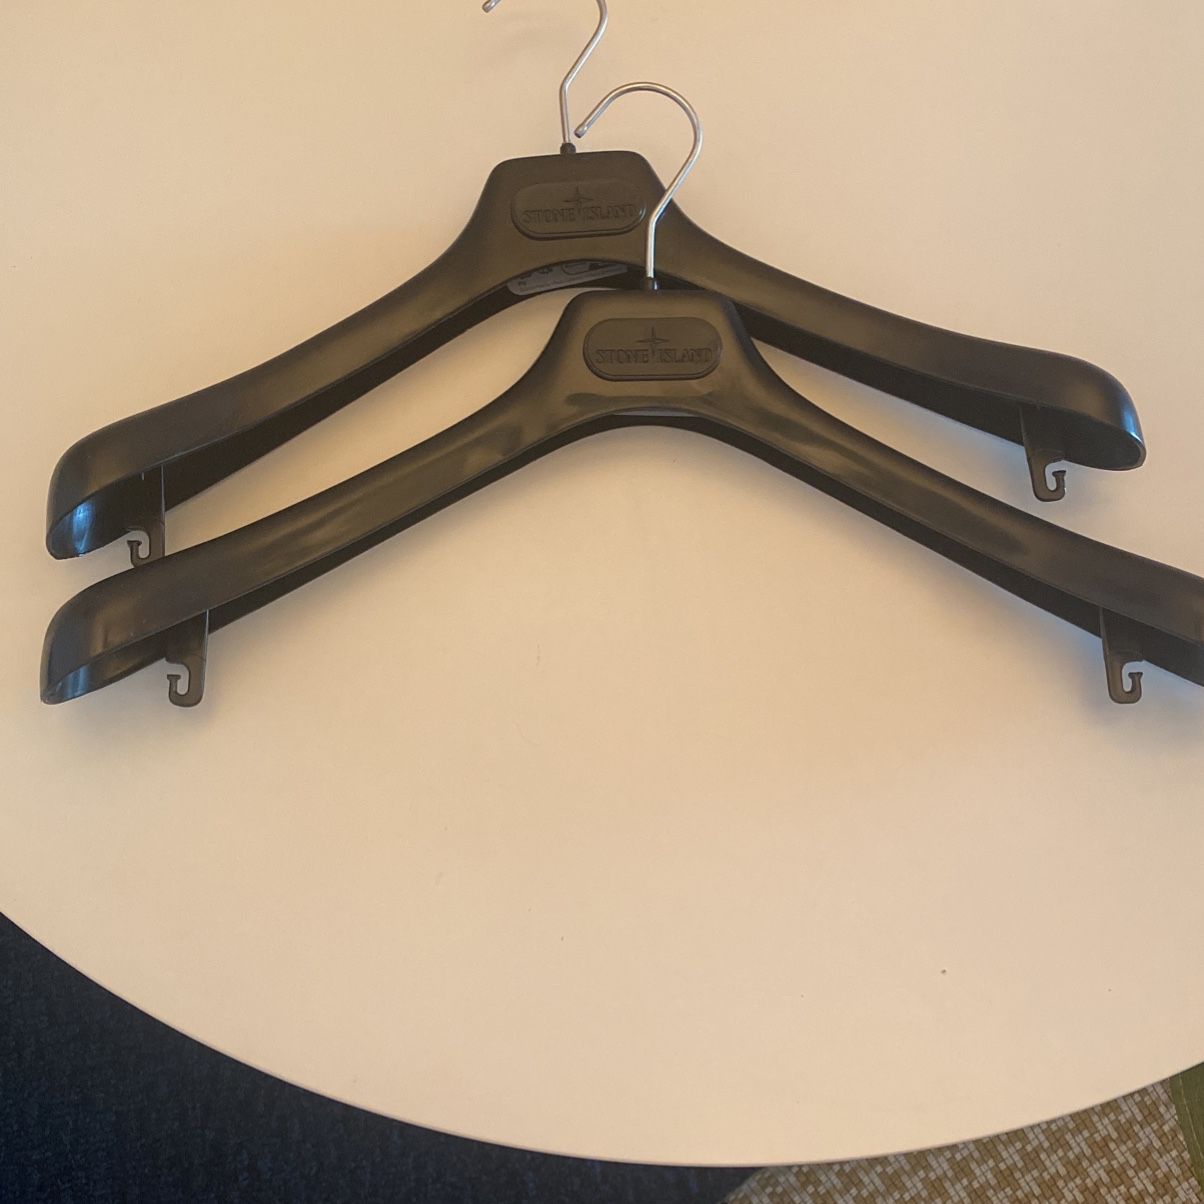 Mainstays Clothes Hangers for Sale in Goodyear, AZ - OfferUp